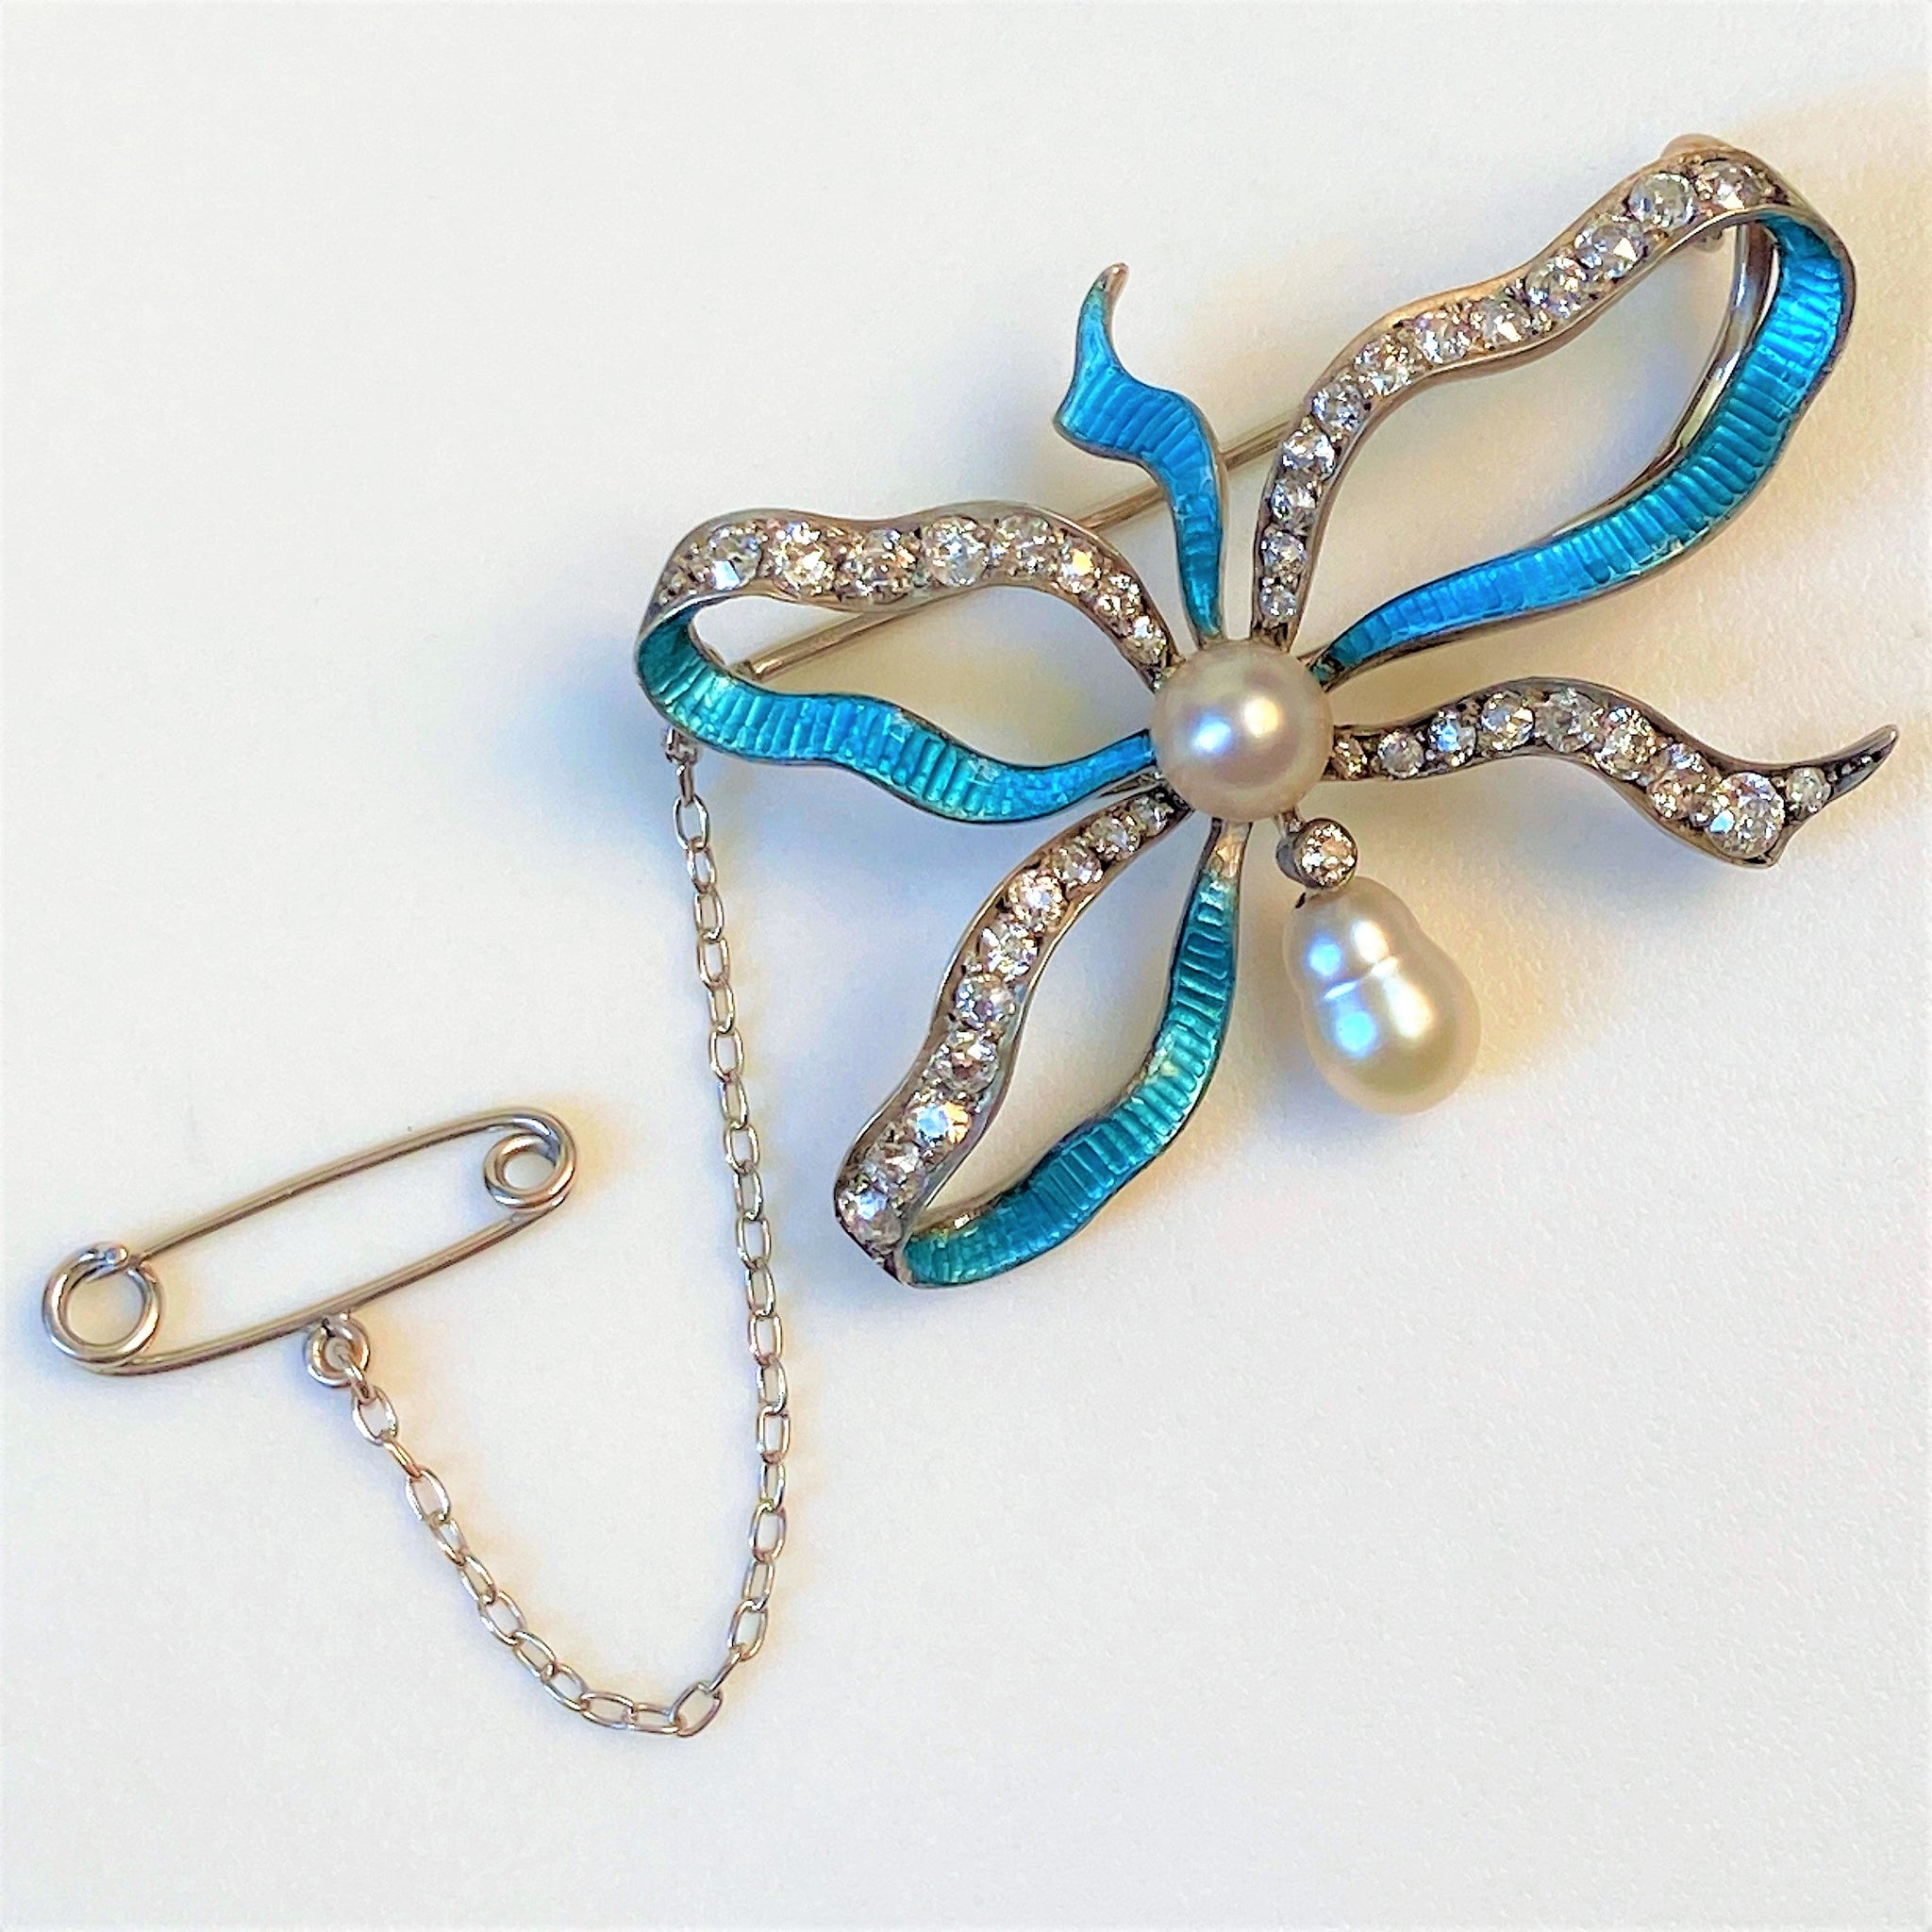 15ct Gold, Diamond, Pearl and Guilloche Enamel "Bow" Brooch